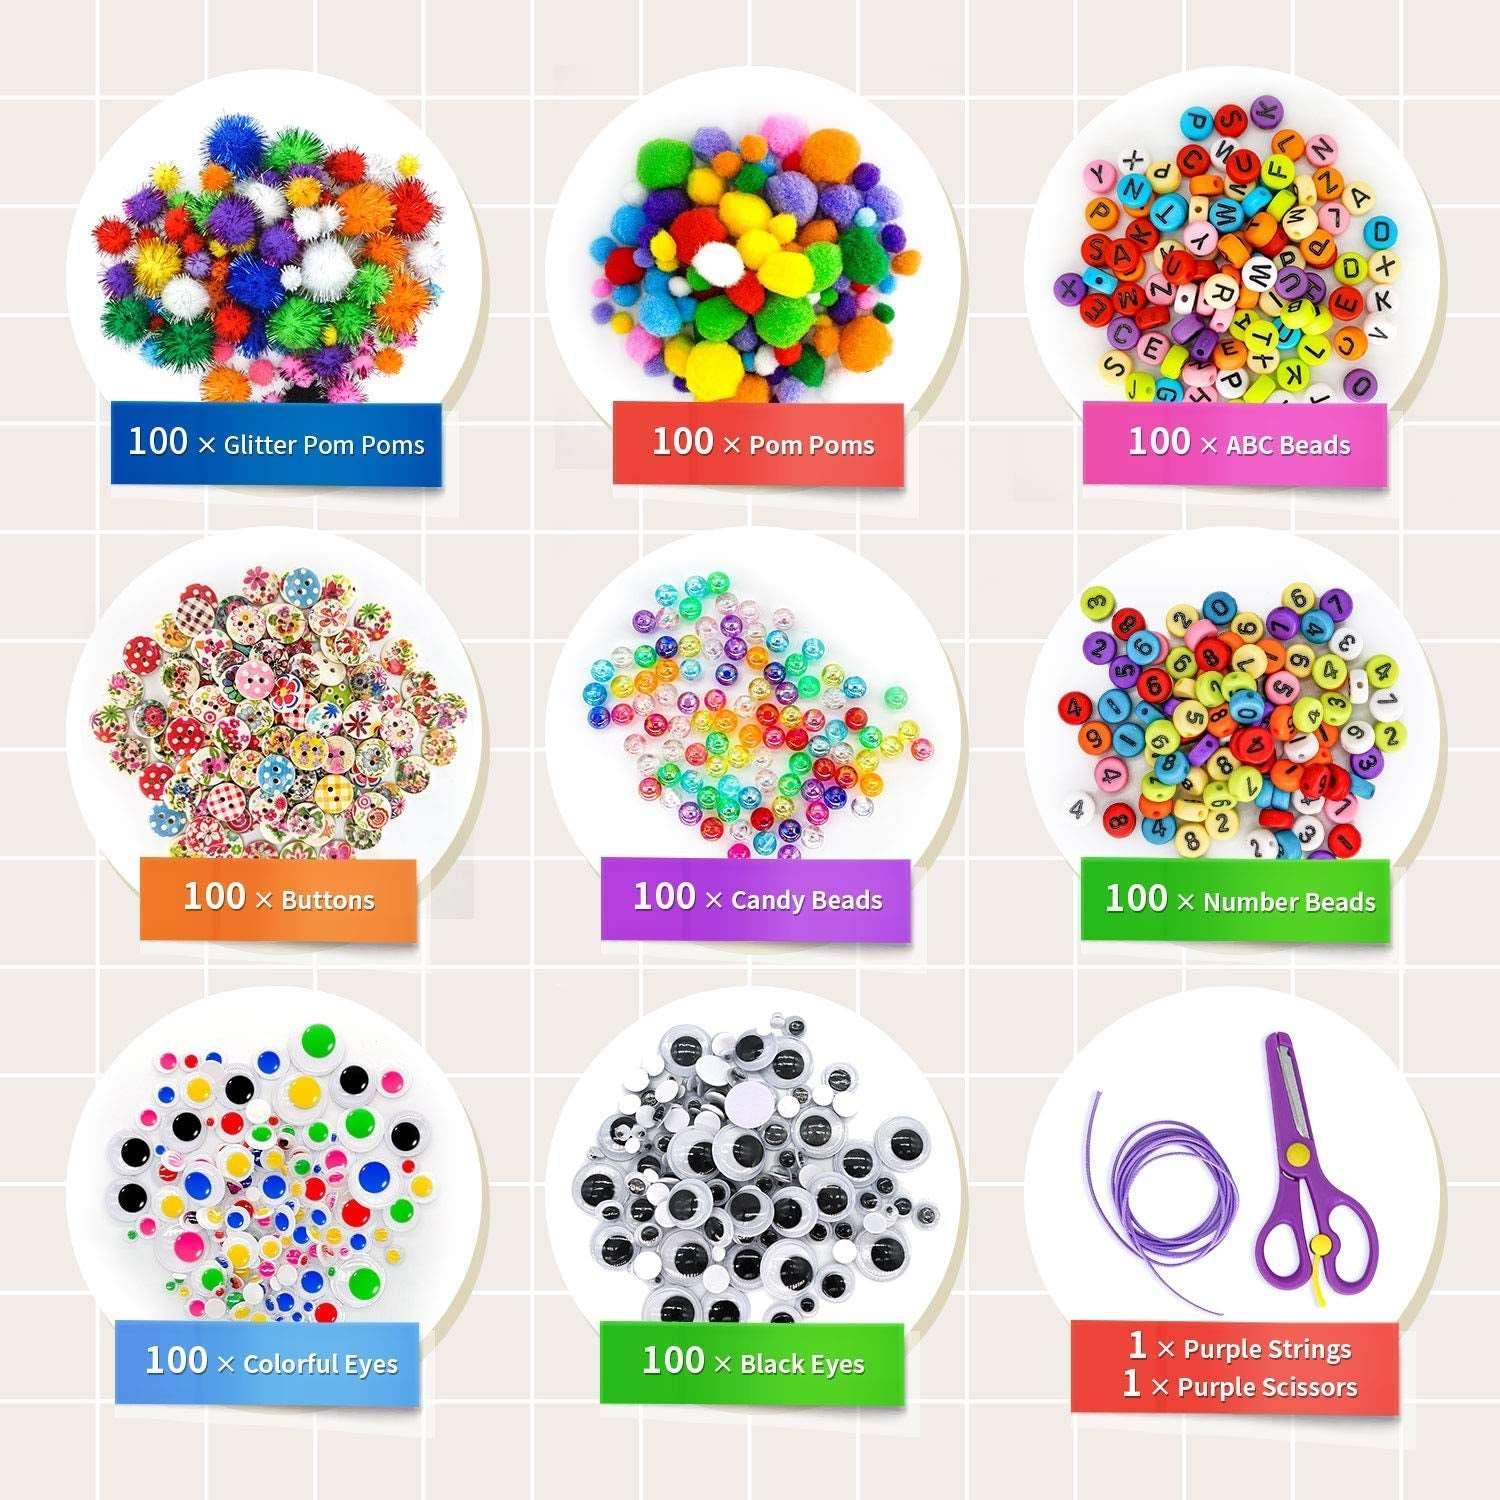  Arts and Crafts Supplies for Kids 1600Pcs DIY Craft Kits Art  Supplies Materials Kids Crafts Set with Pipe Cleaners Craft Box Preschool  Homeschool Toys Gift for Kids Boys and Girls Age